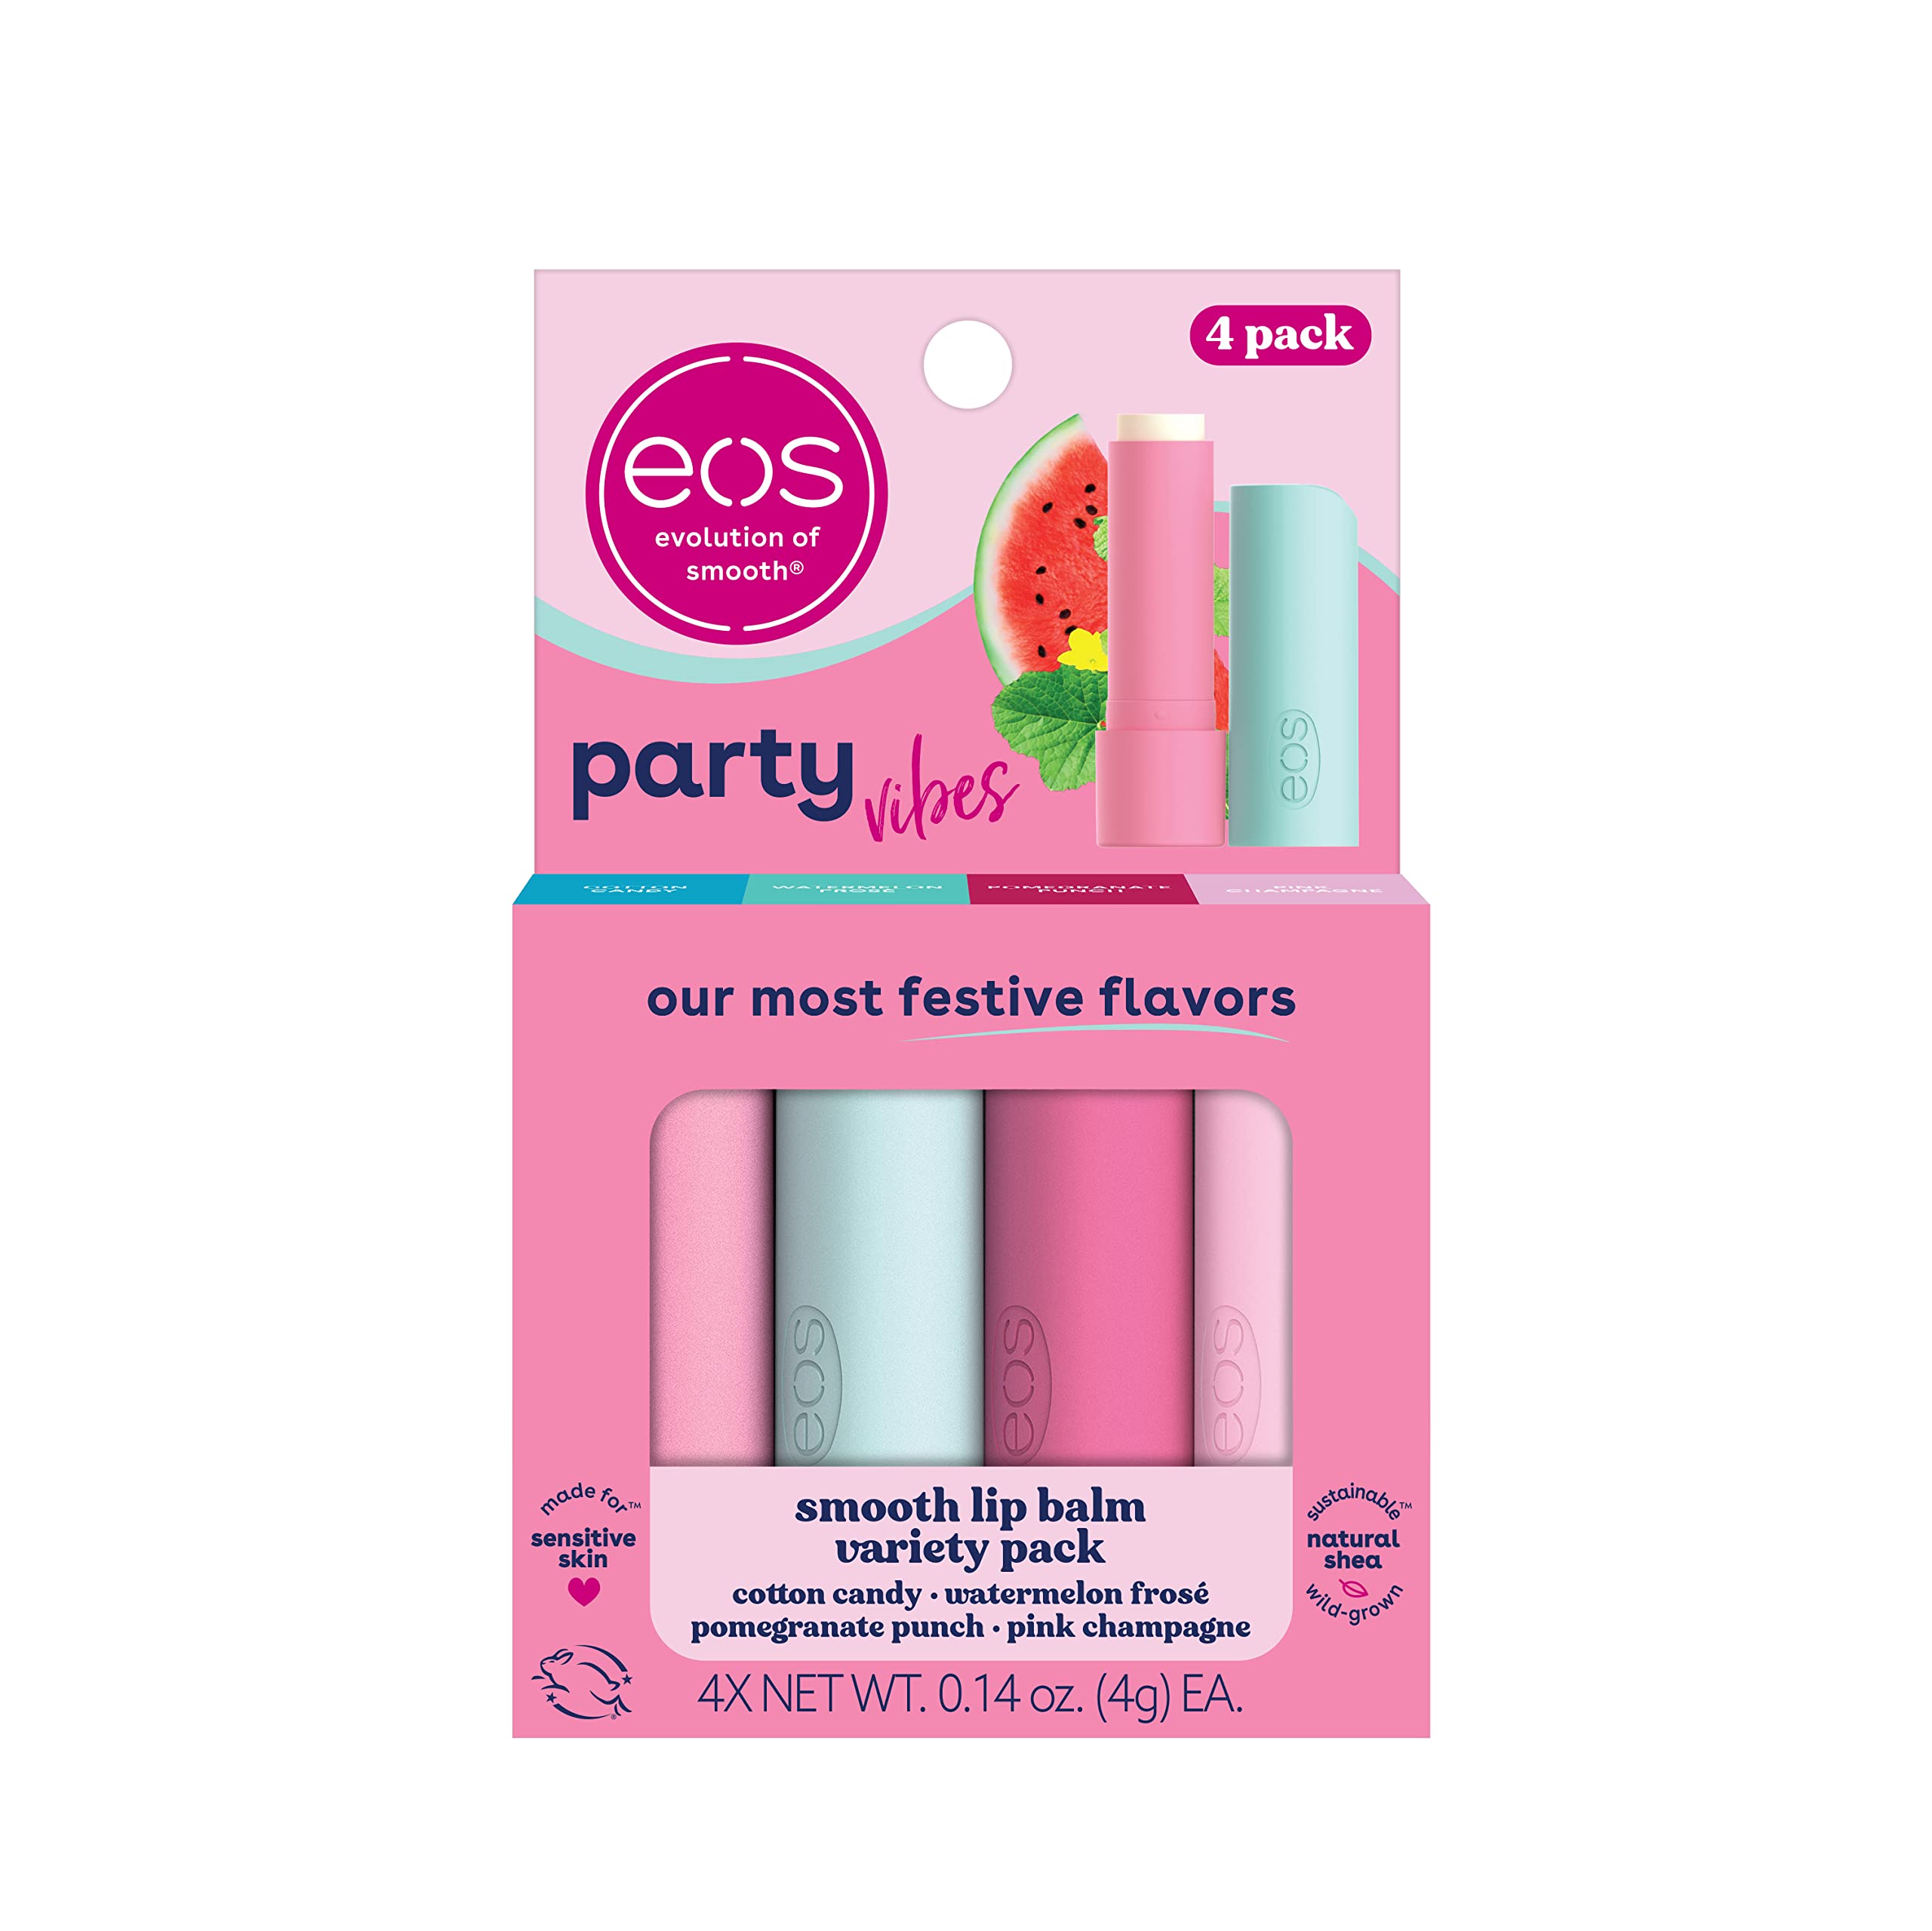 4-Pack 0.14-Oz. eos Party Vibes Lip Balm Variety Pack $3.85 w/ S&S + Free Shipping w/ Prime or on orders over $35